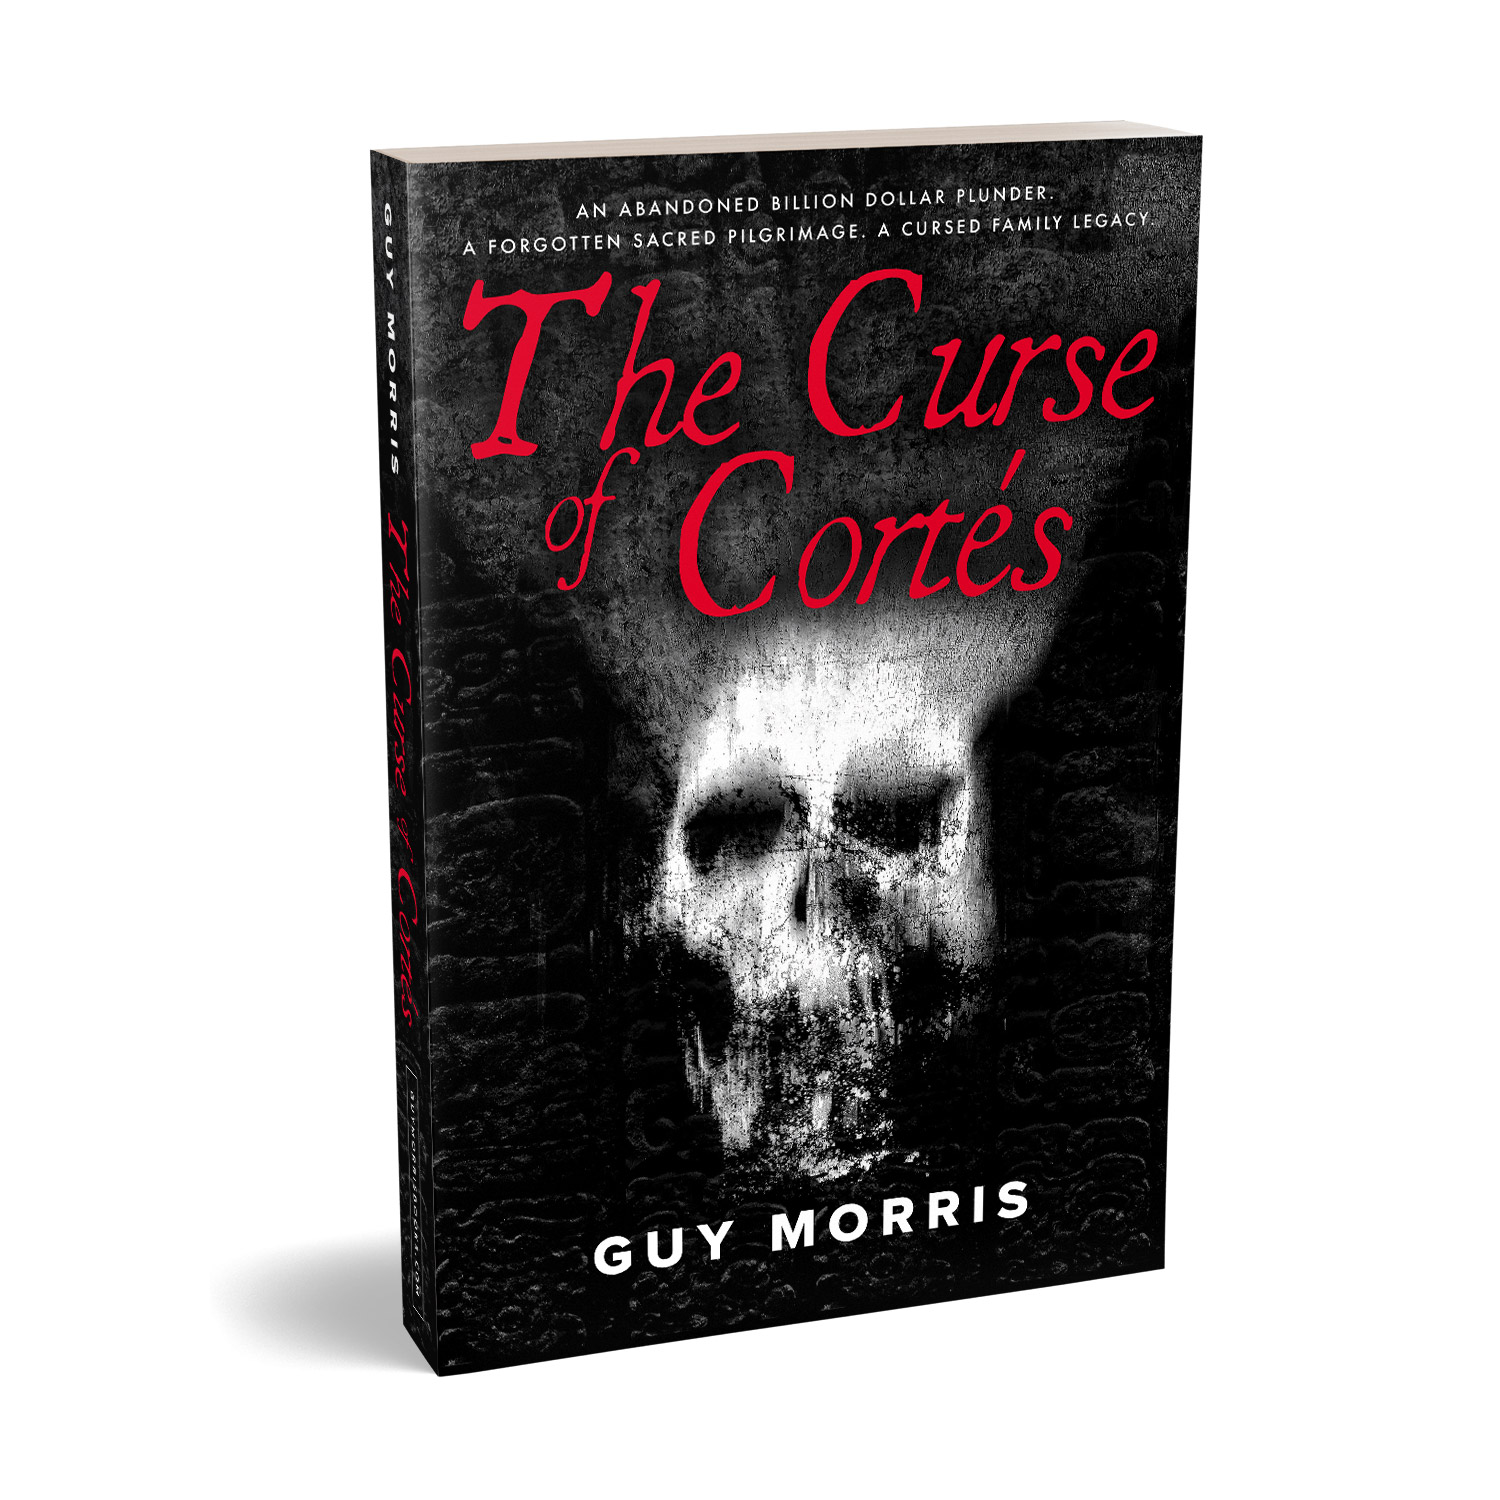 'The Curse of Cortés' is a rattling hybrid historical thriller by Guy Morris. The book cover design & interior formatting are by Mark Thomas. To learn more about what Mark could do for your book, please visit coverness.com.